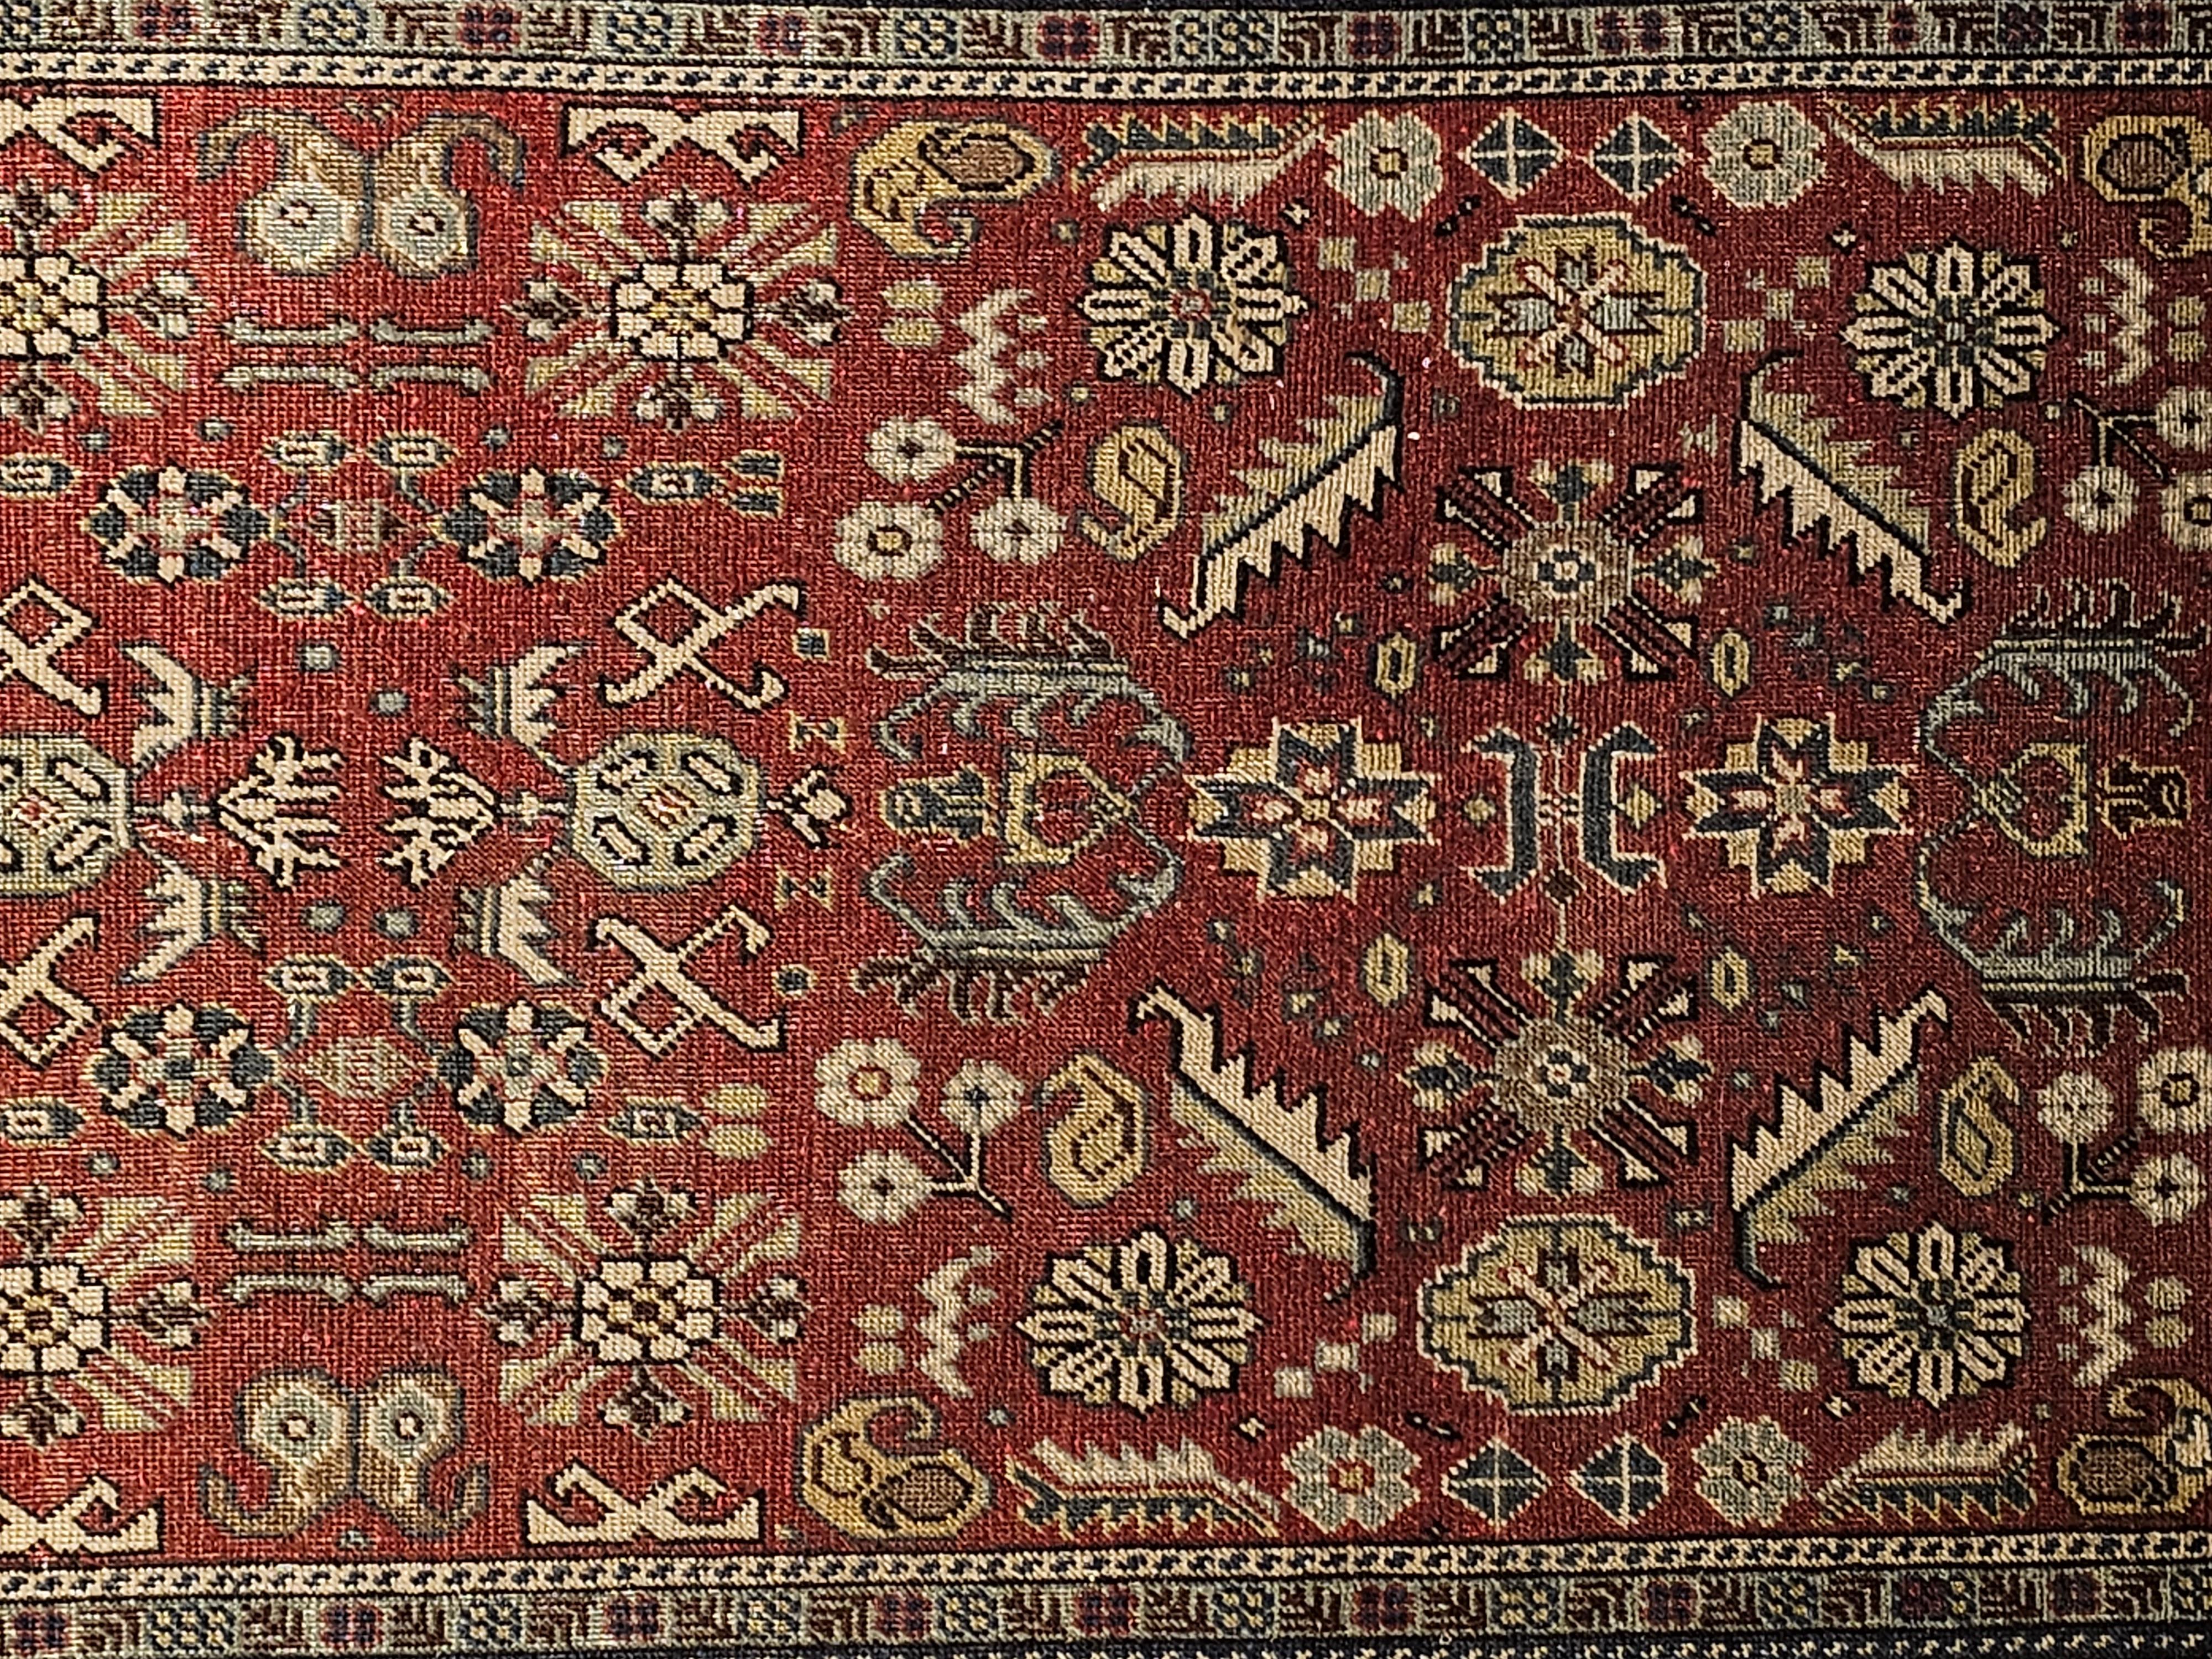 Vintage Khotan area rug in an all over geometric pattern in brick red, yellow, ivory colors.  The Khotan area rug was handwoven and is from Central Asia circa the first quarter of the 1900s.  The rug has an allover design of various small medallion